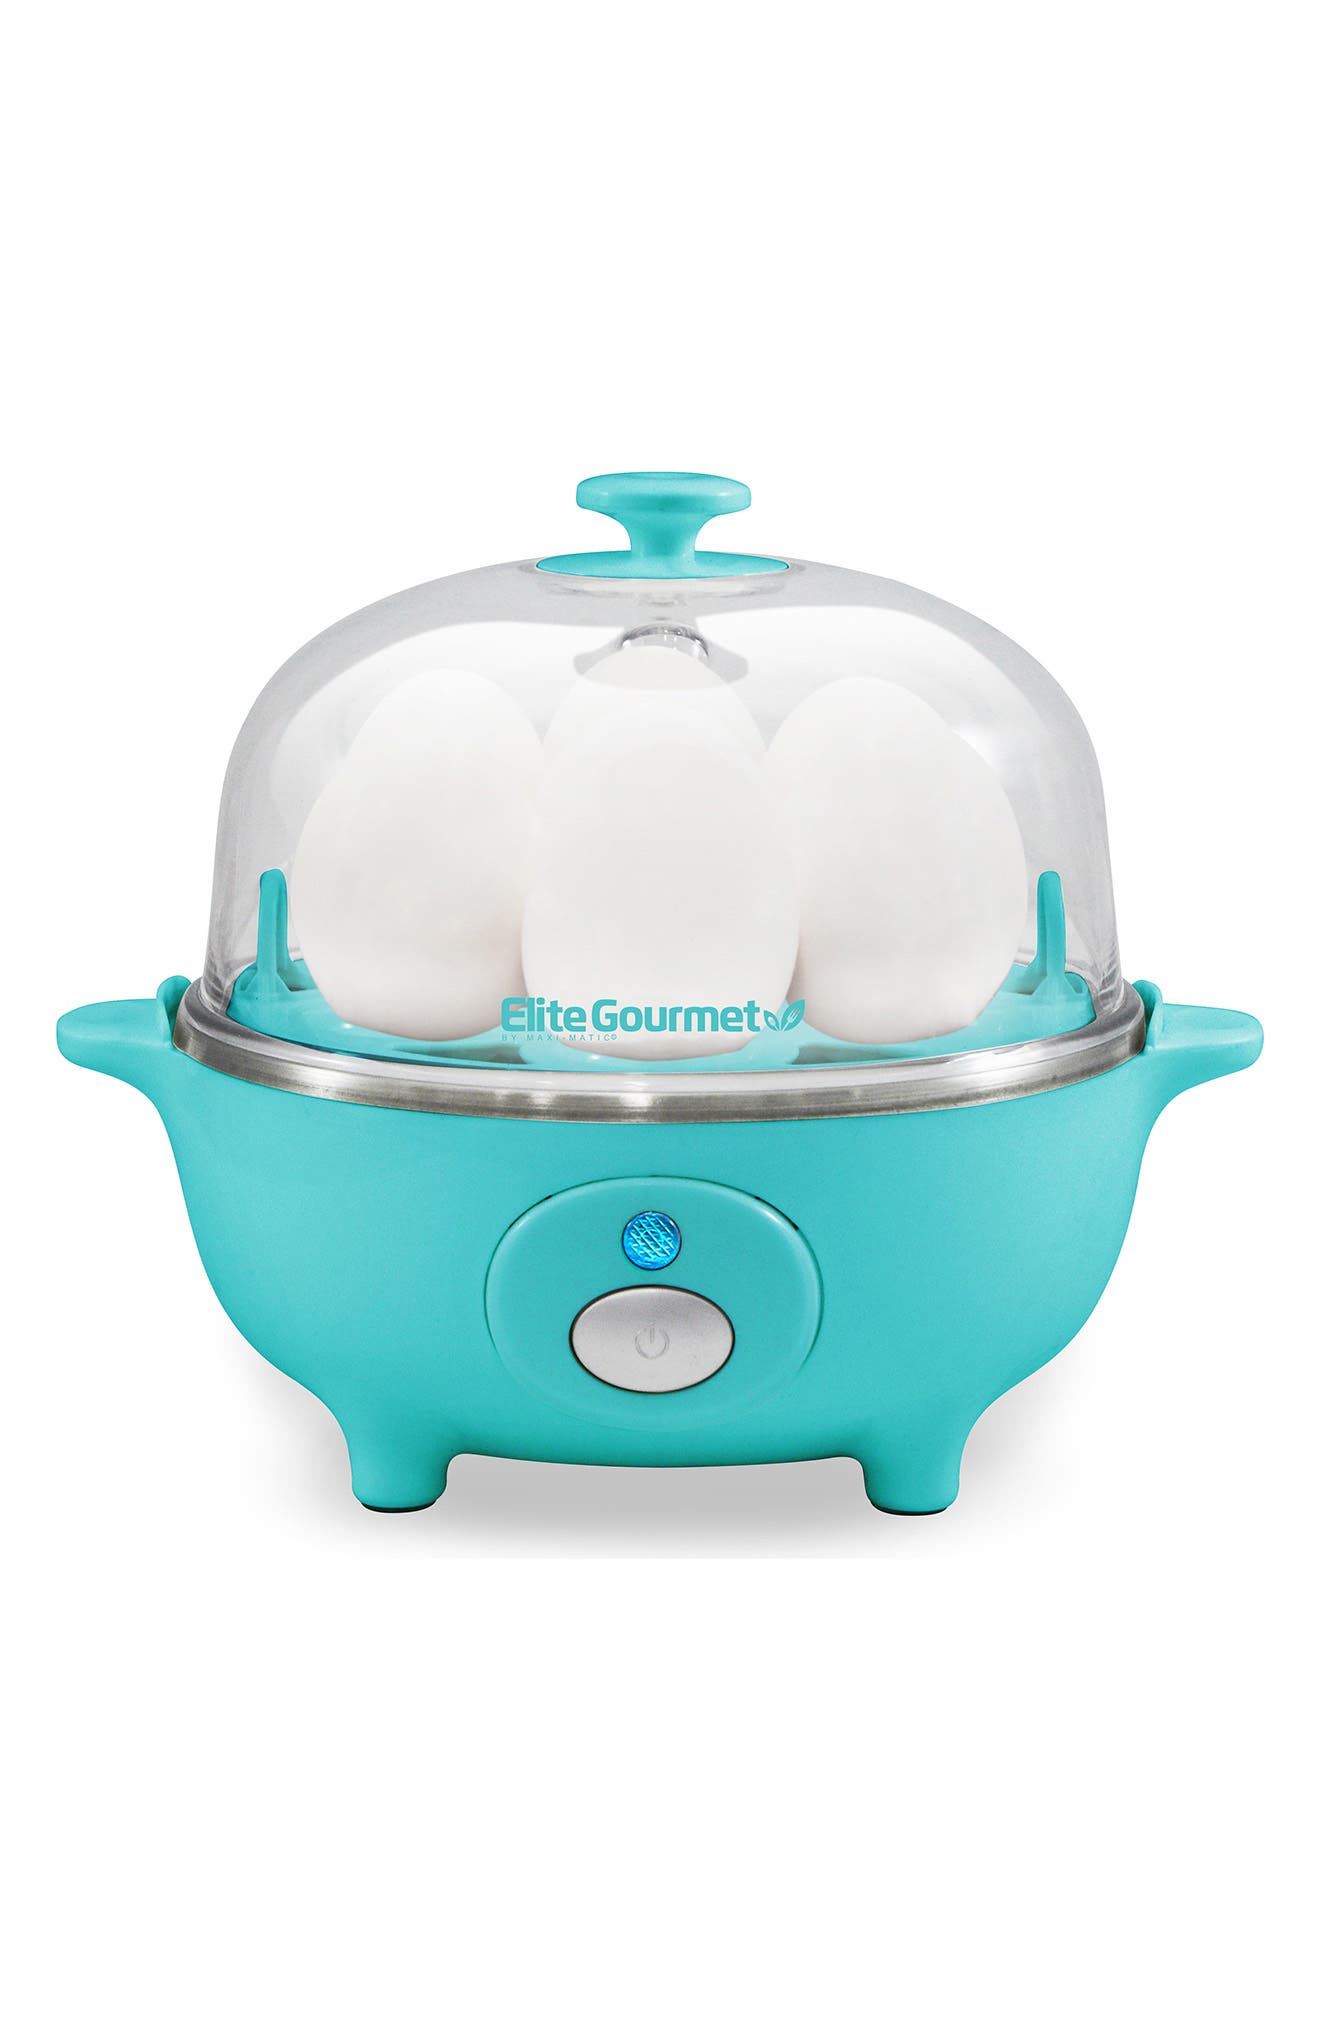 Maxi-matic Elite Cuisine Egc-007t Automatic Easy Egg Cookier In Teal